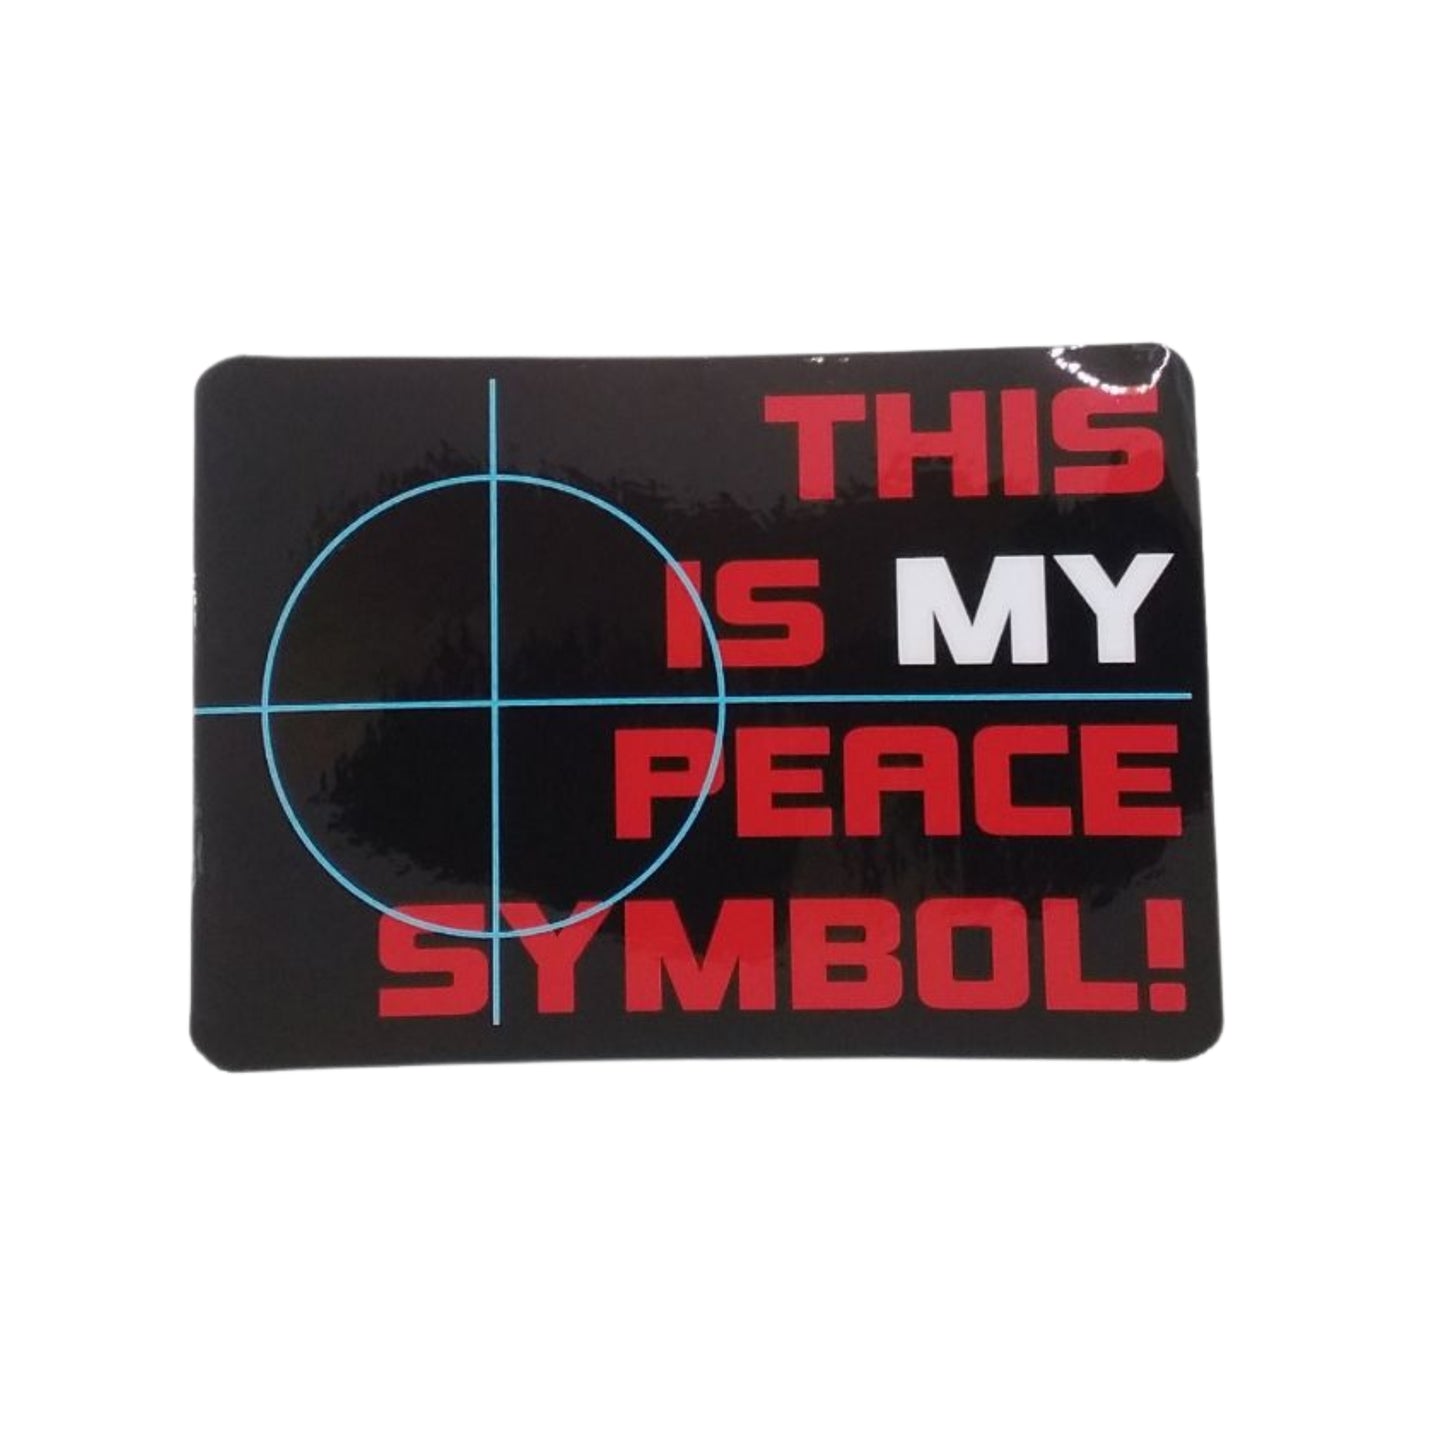 This Is My Peace Symbol! - Sticker